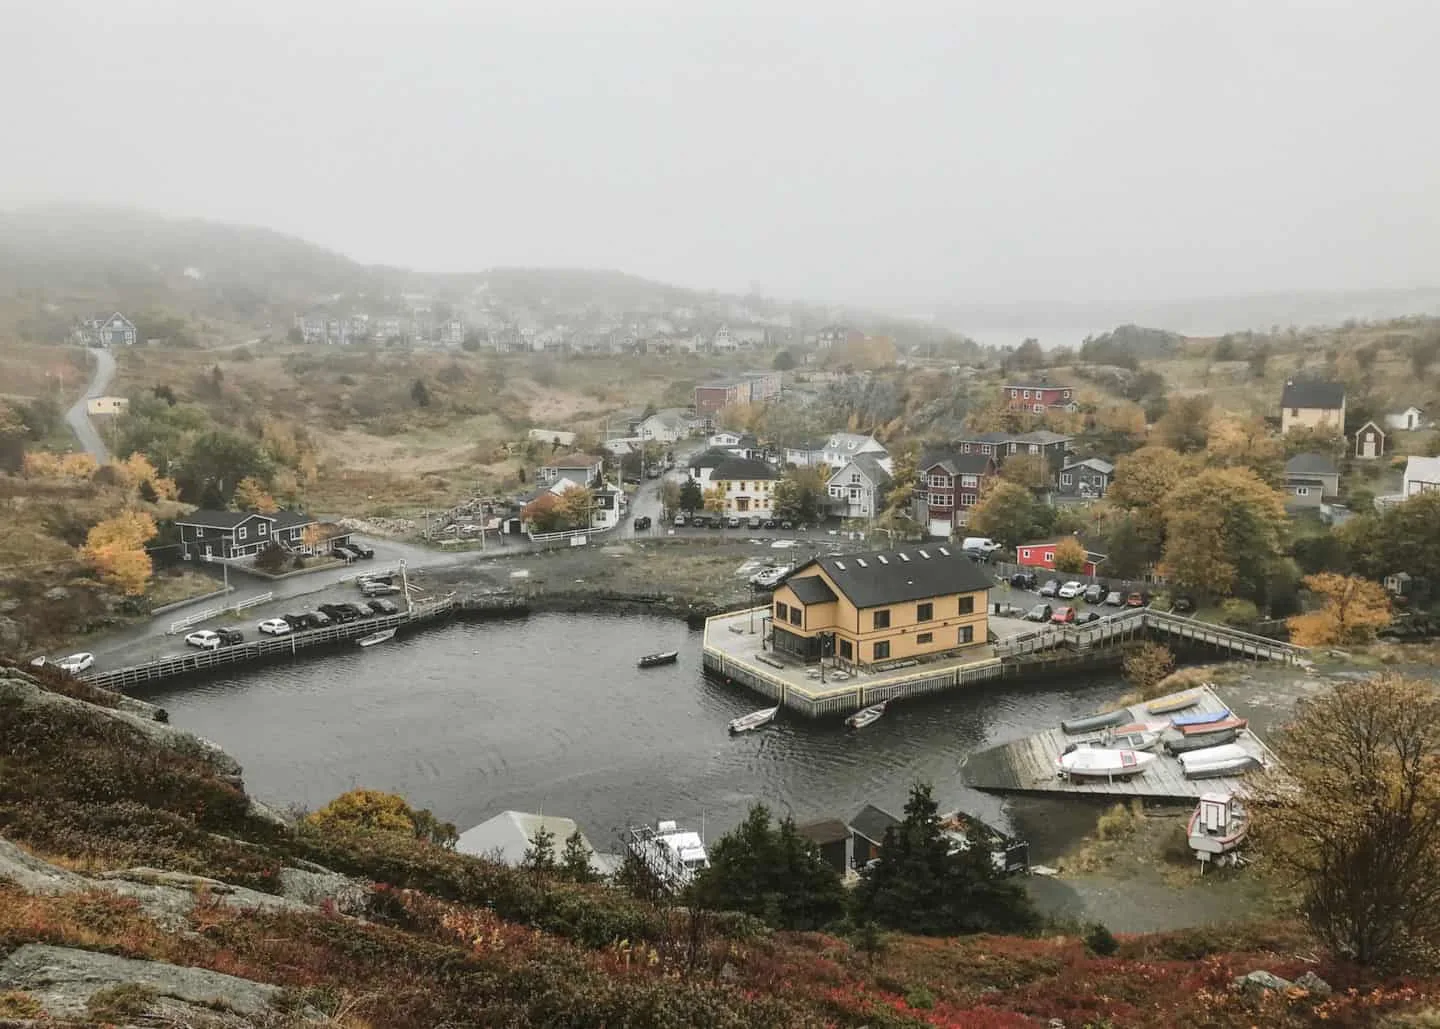 Quidi Vidi is one of the best stops to make during your 4 days in St. John's, Newfoundland